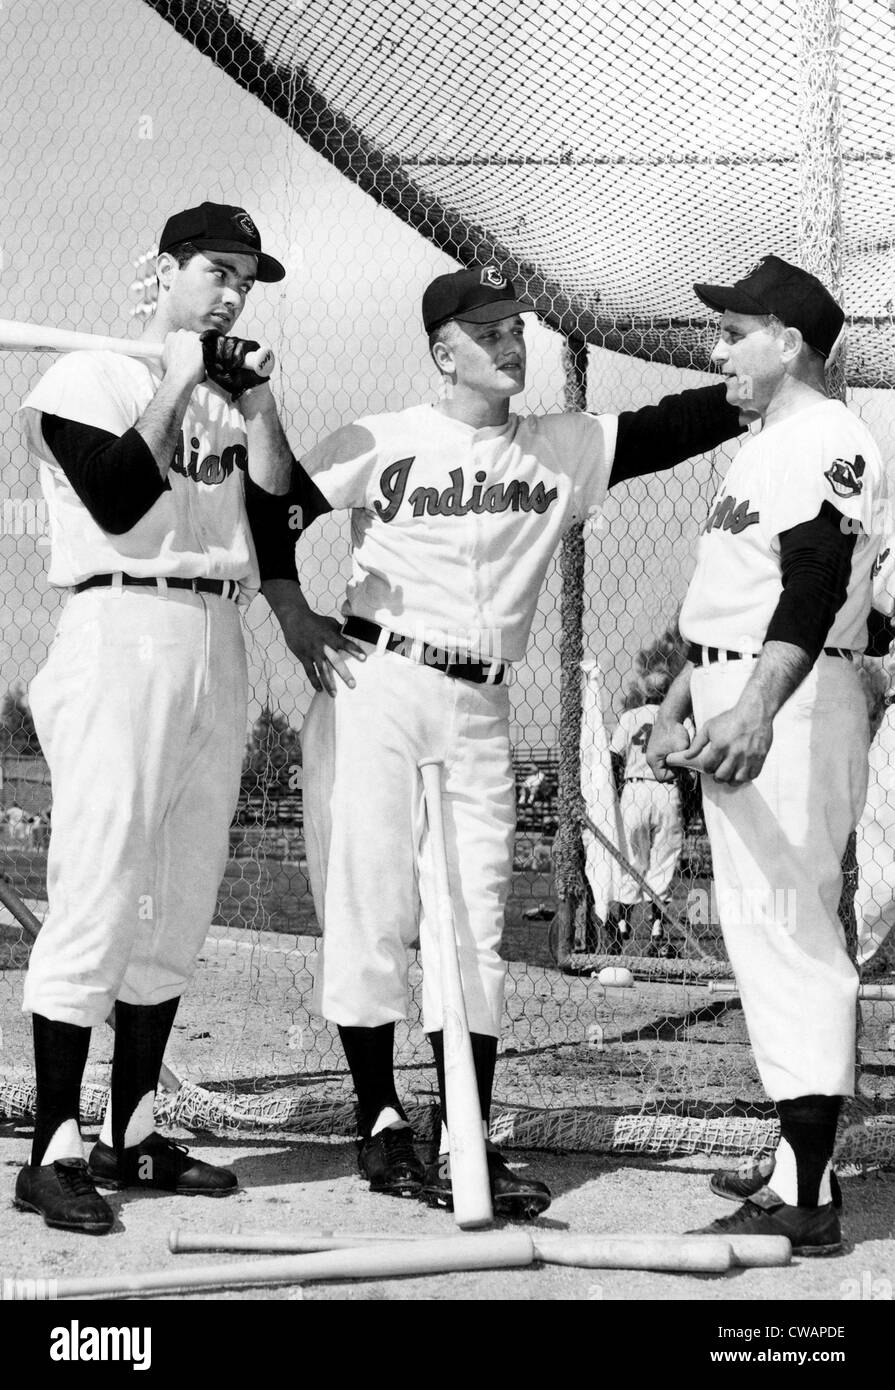 Rocky Colavito, Roger Maris, and Gene Woodling of the Cleveland Indians, at the batting cage, 1958.. Courtesy: CSU Archives / Stock Photo